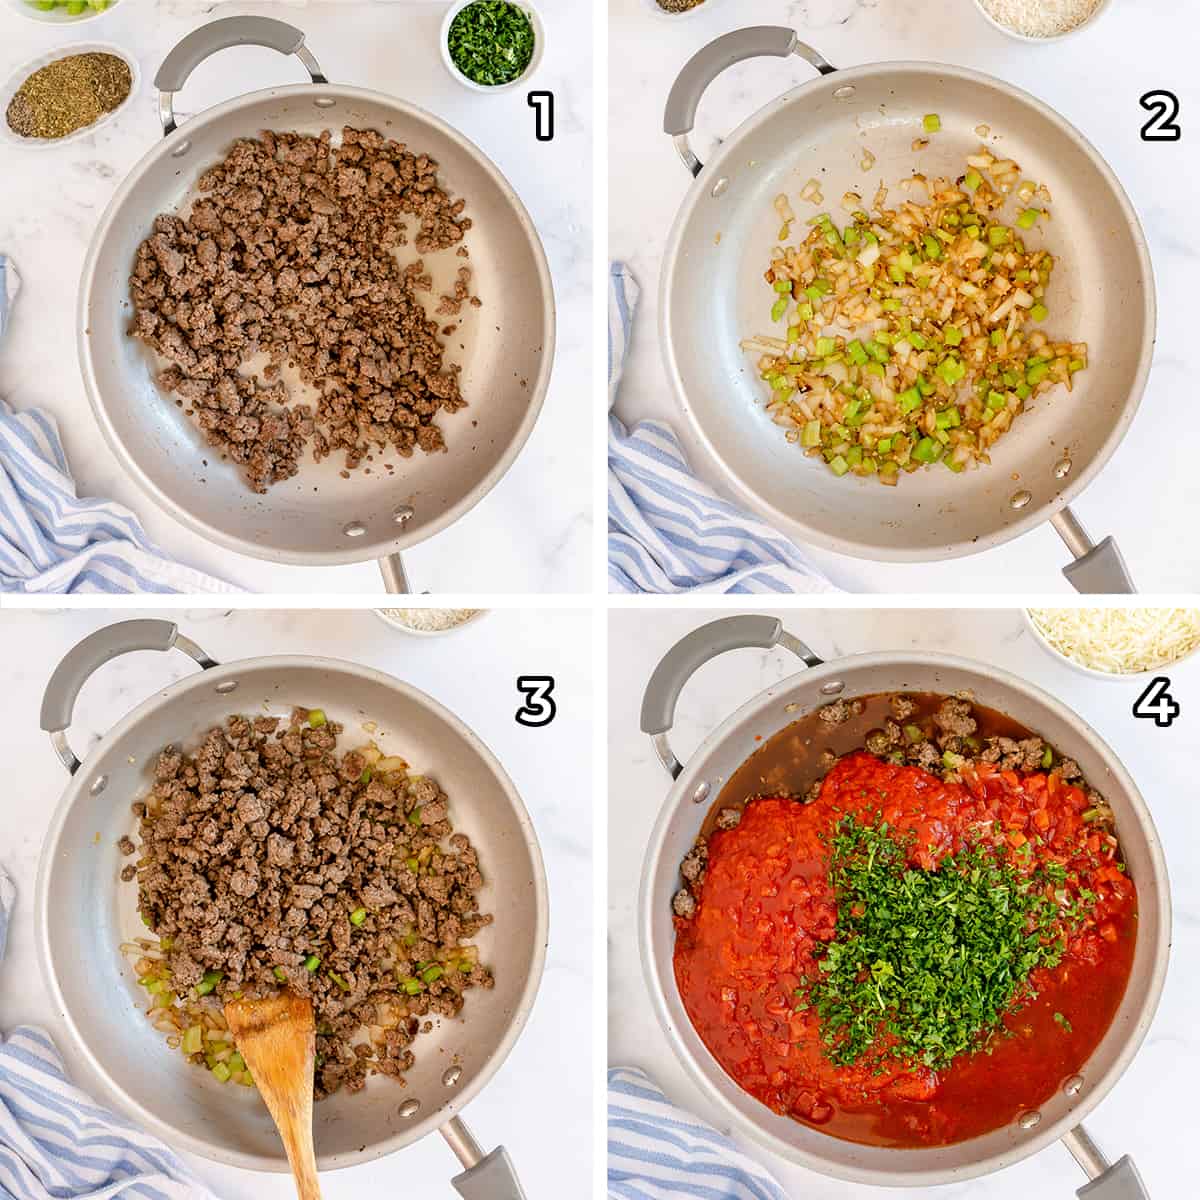 Ground beef is cooked in a skillet with onion, celery, and marinara.